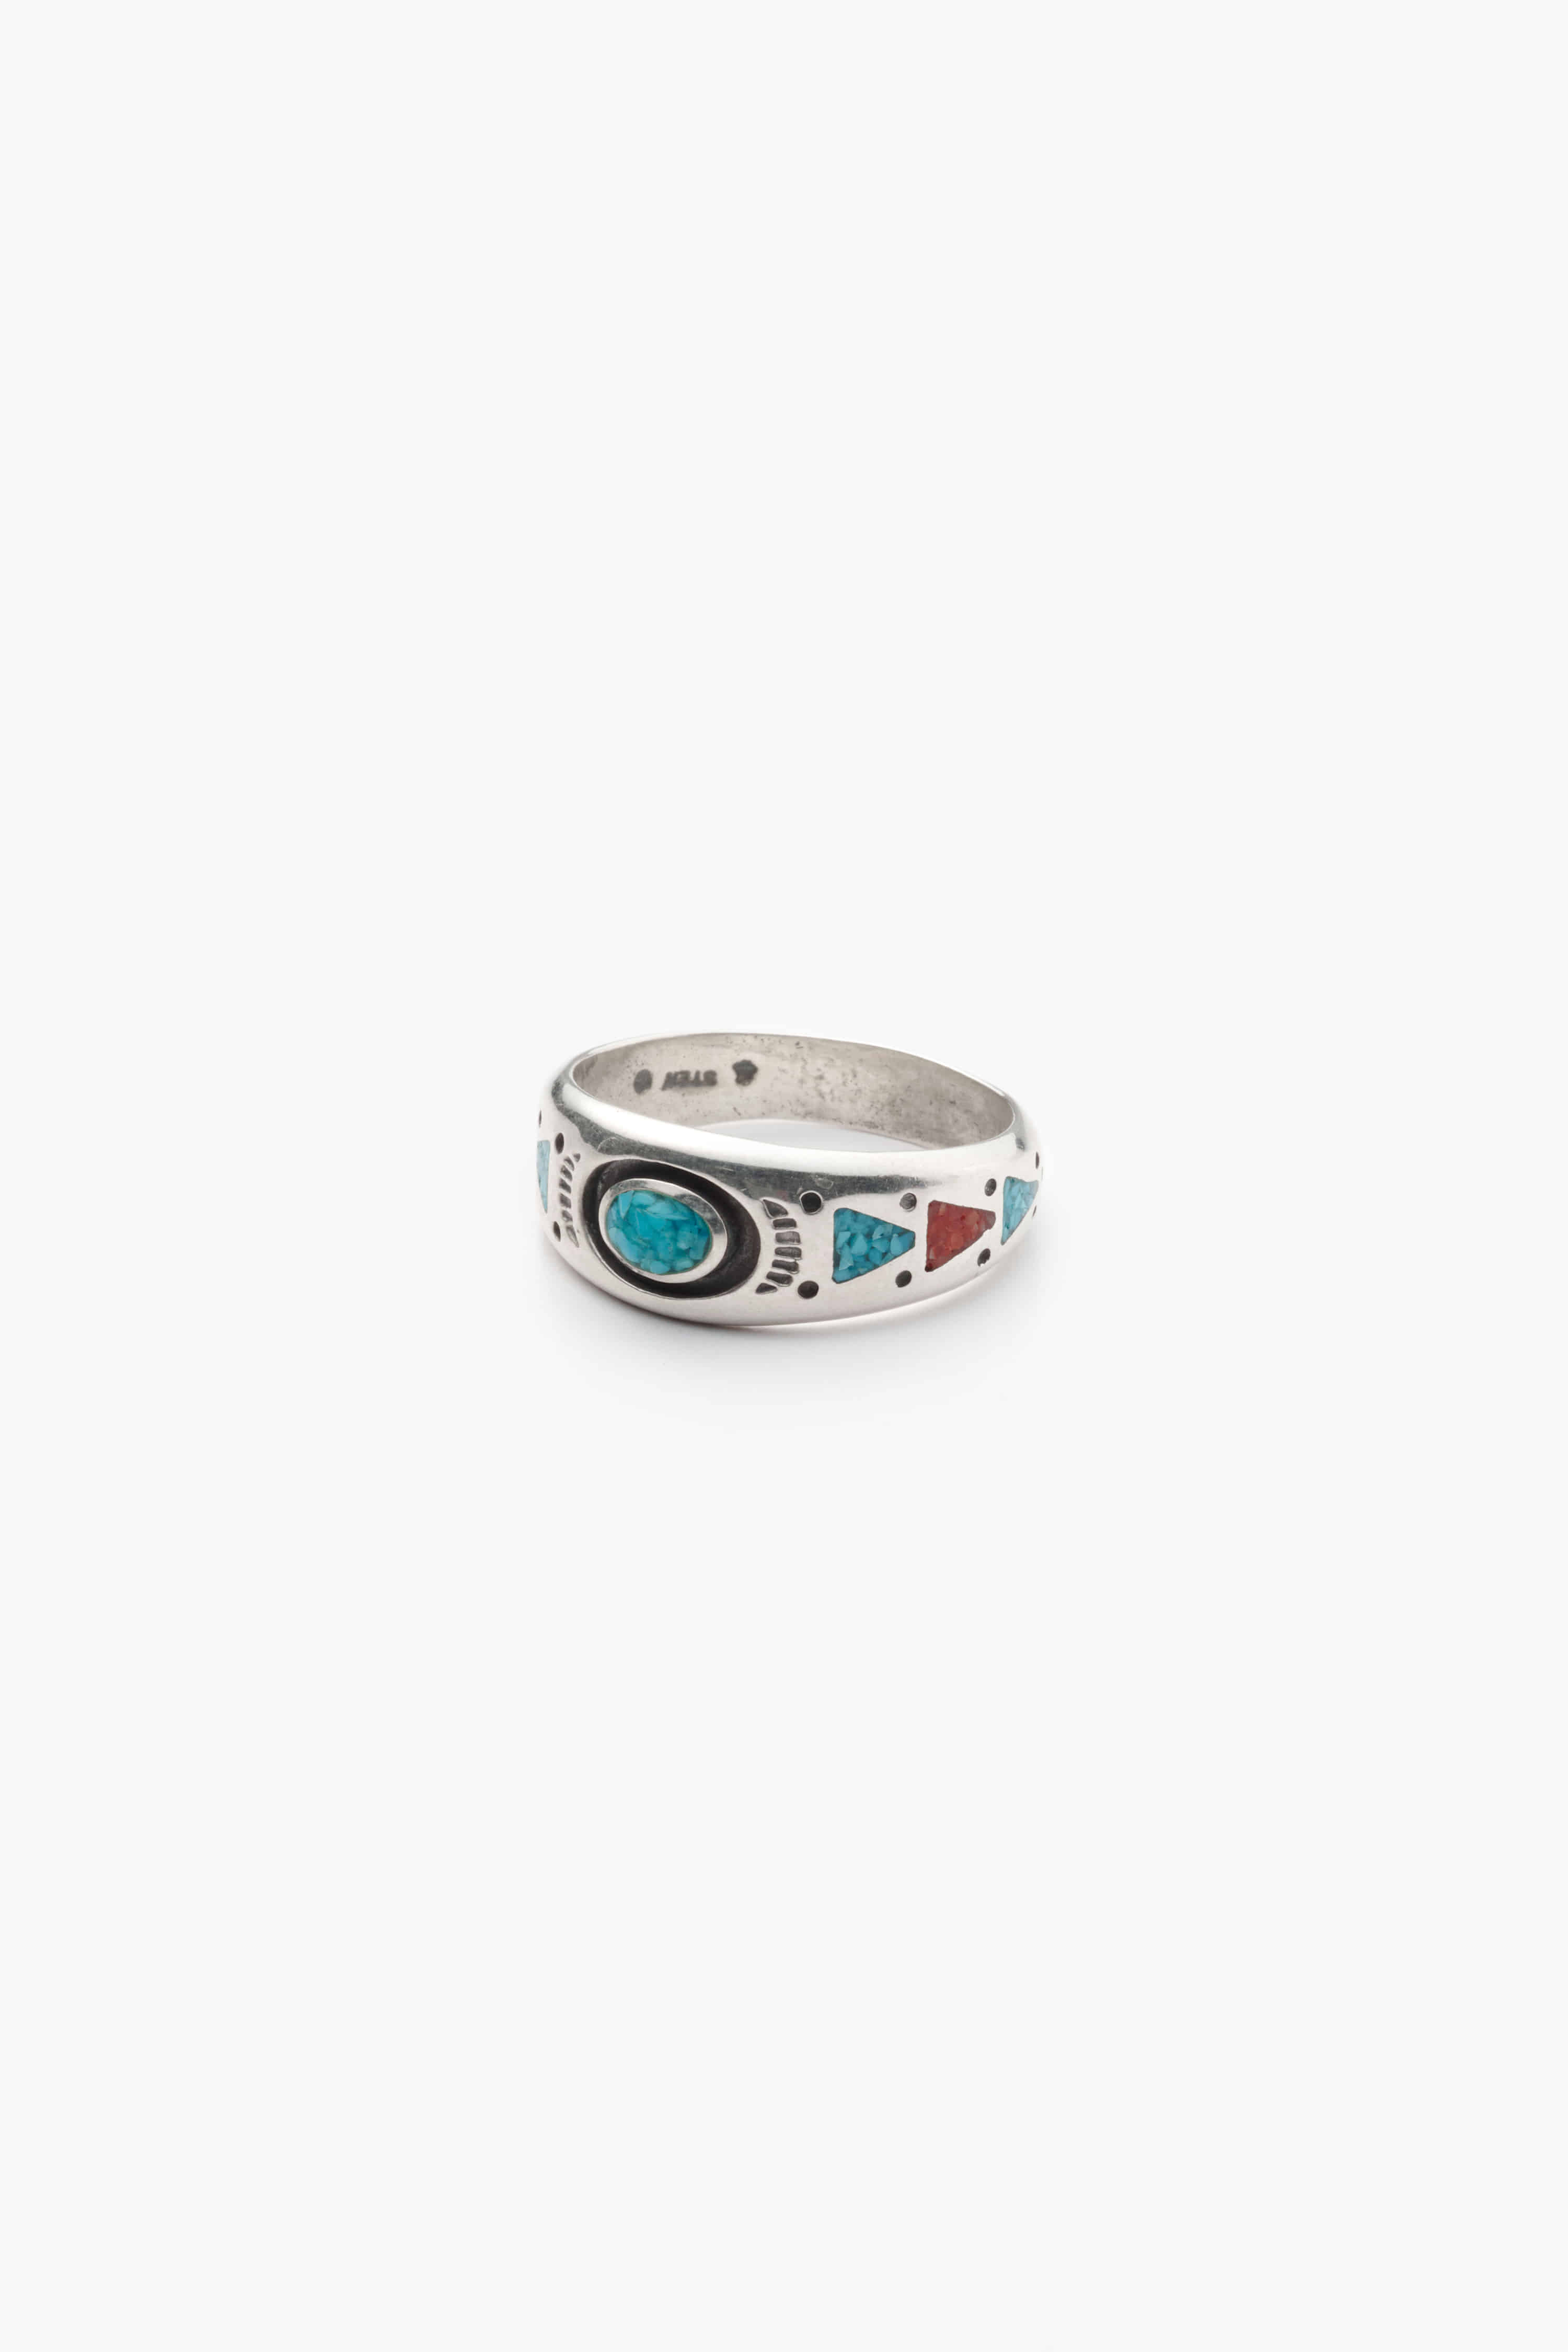 TURQUOISE R150 RING